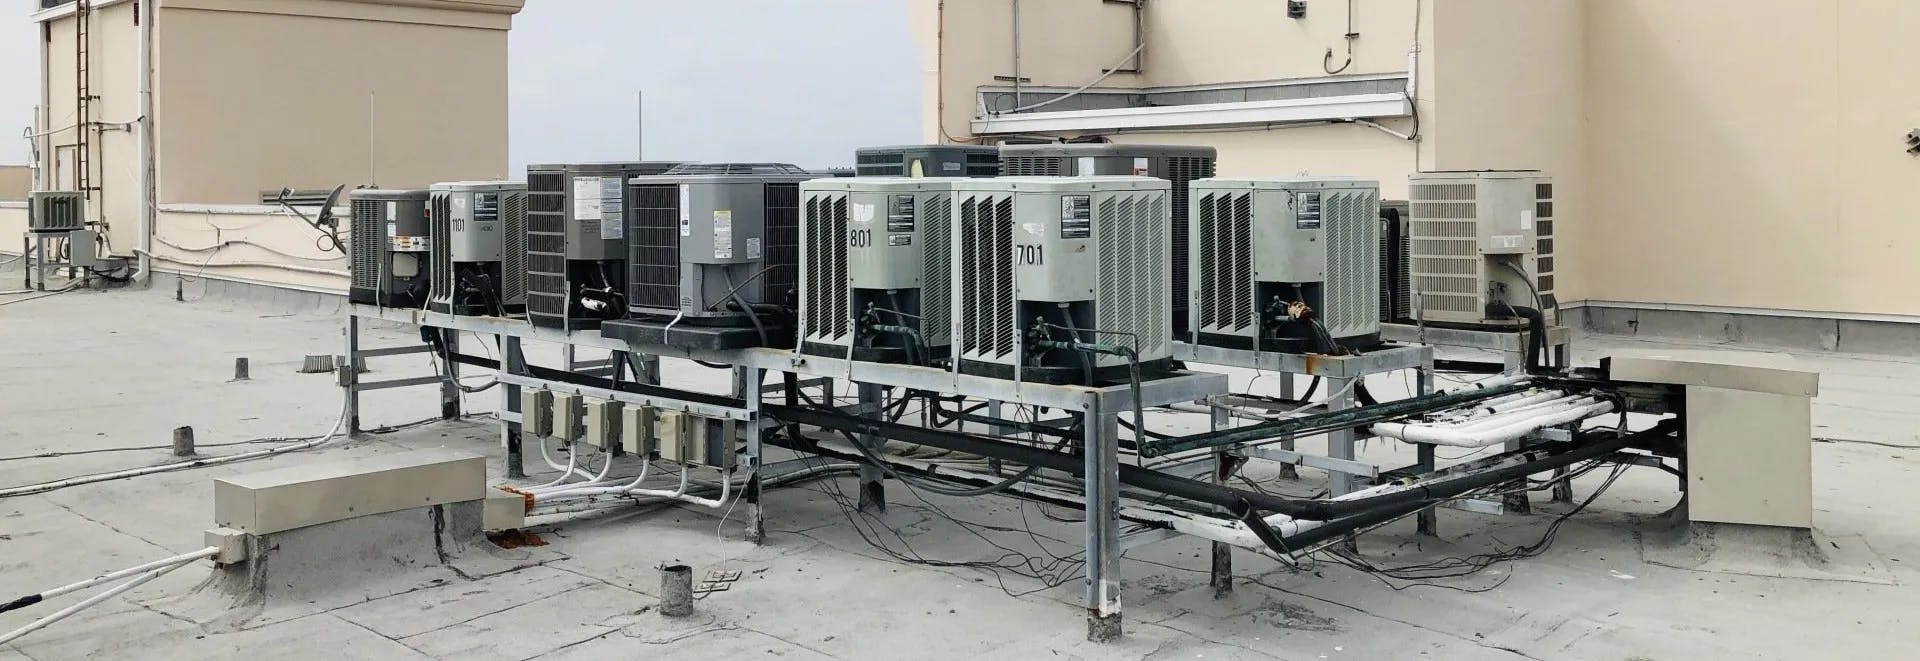 Air Conditioning Units on rooftop 